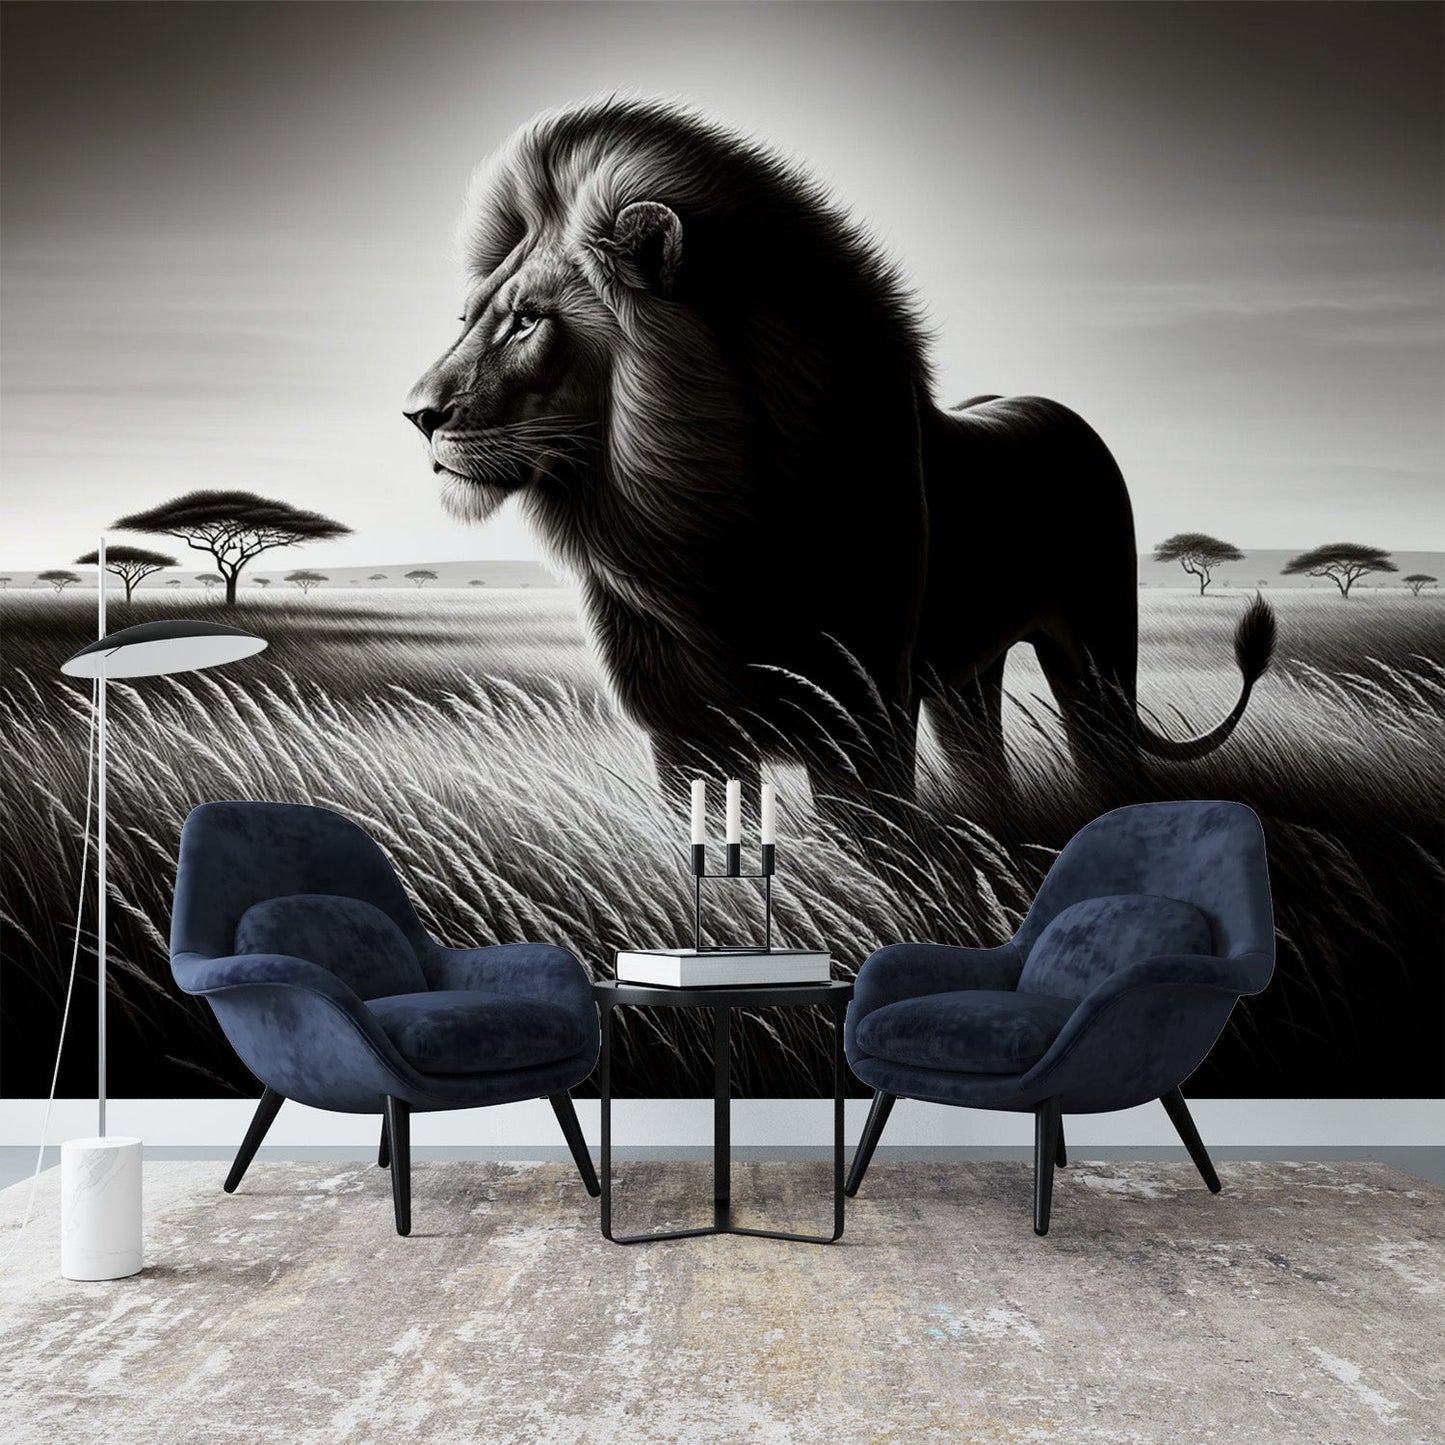 Black and white lion wallpaper | Profile in the savannah